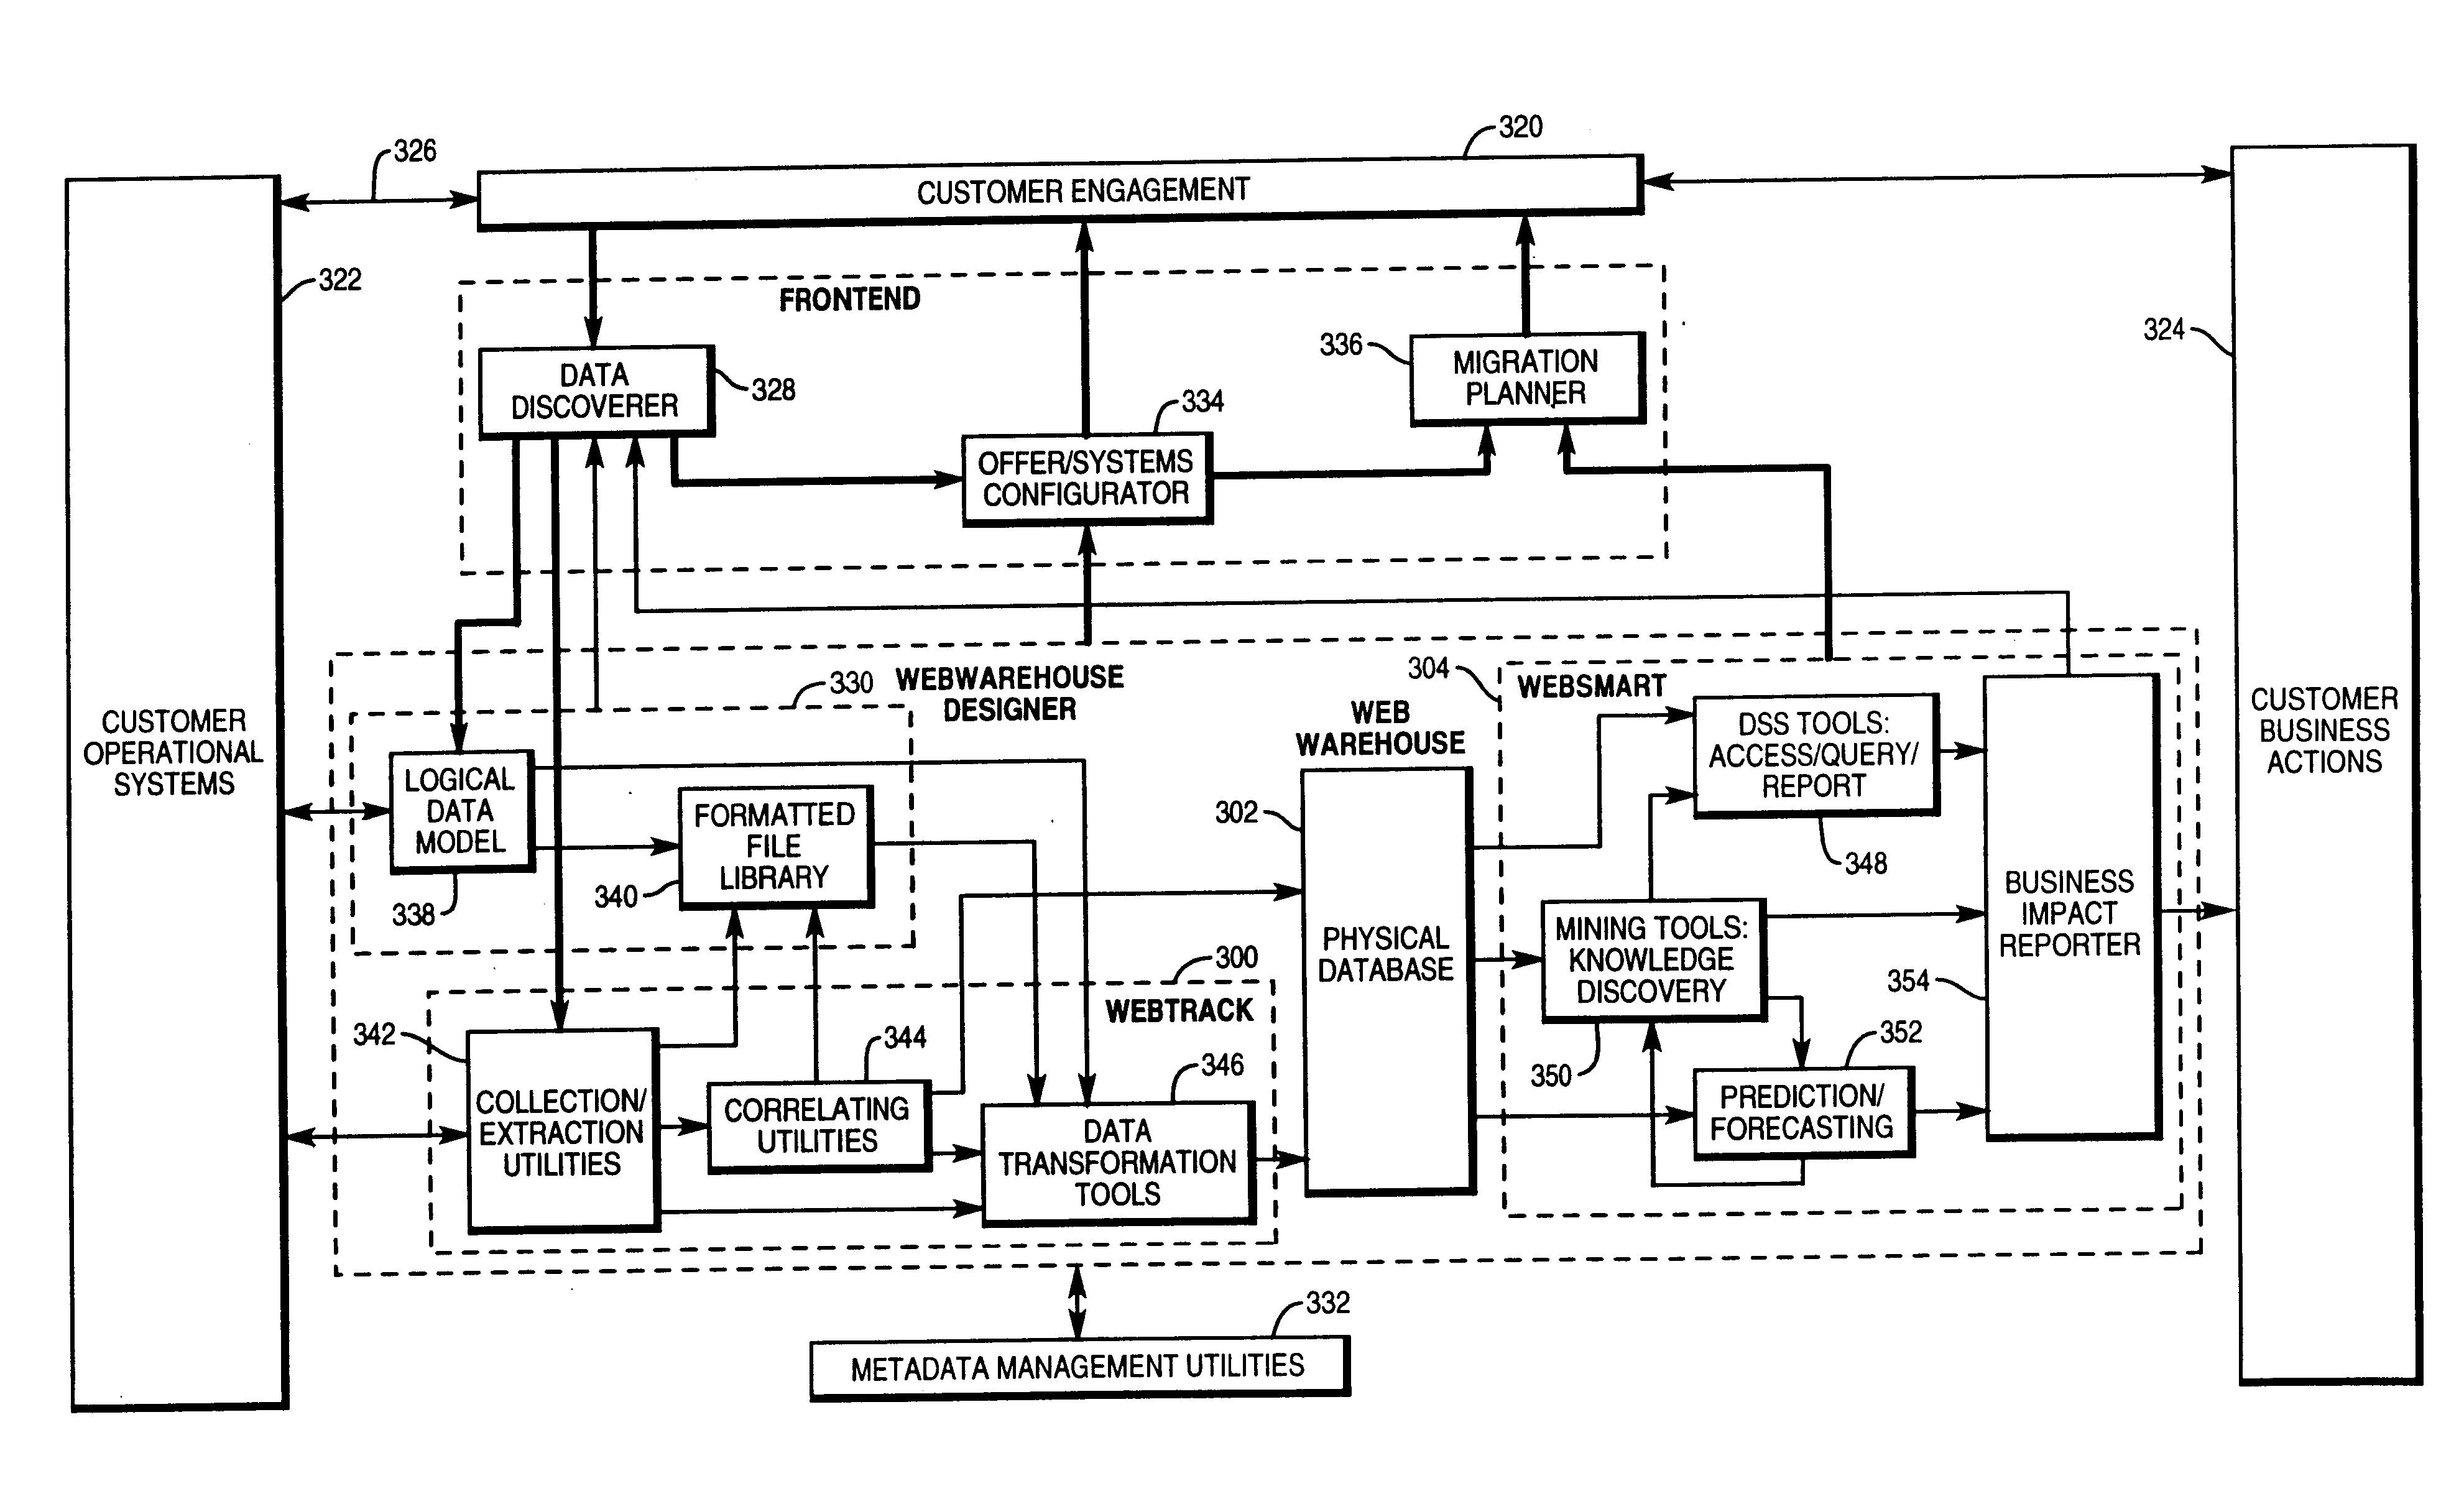 Computer architecture and method for supporting and analyzing electronic commerce over the world wide web for commerce service providers and/or internet service providers